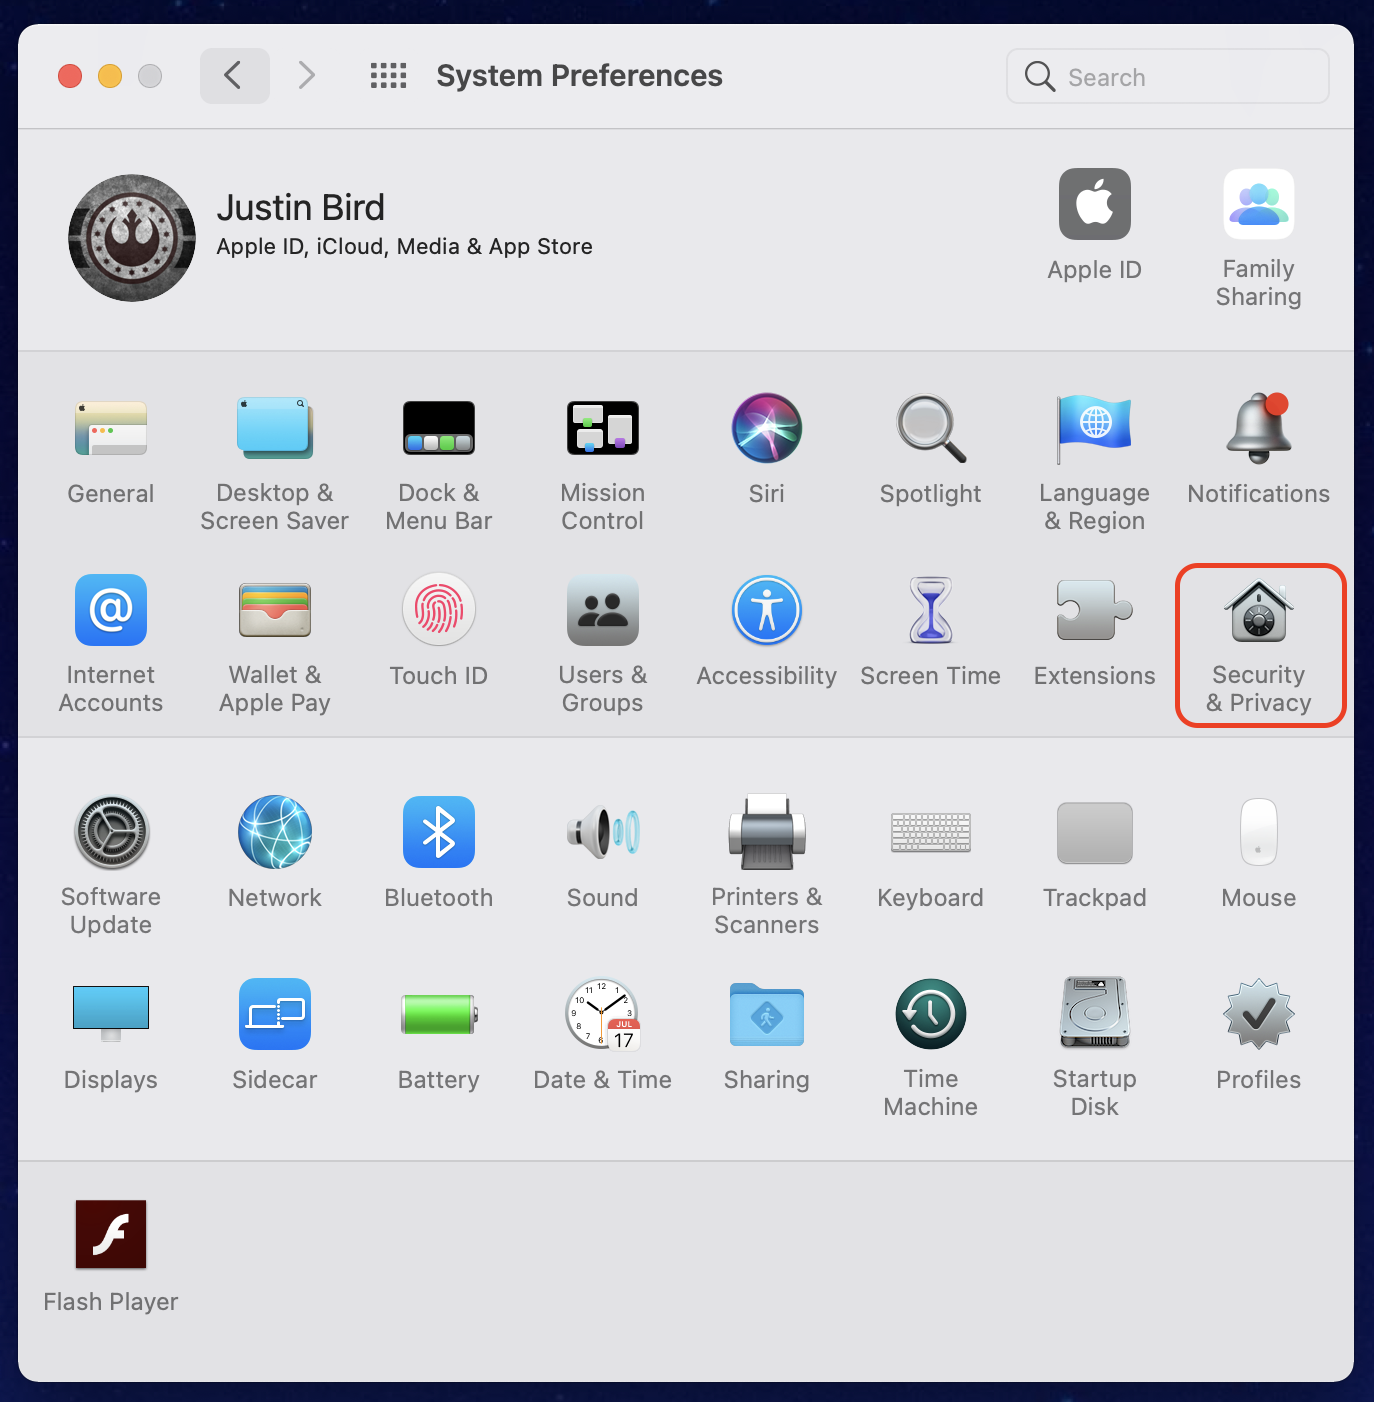 navigate to system preferences and select security & privacy